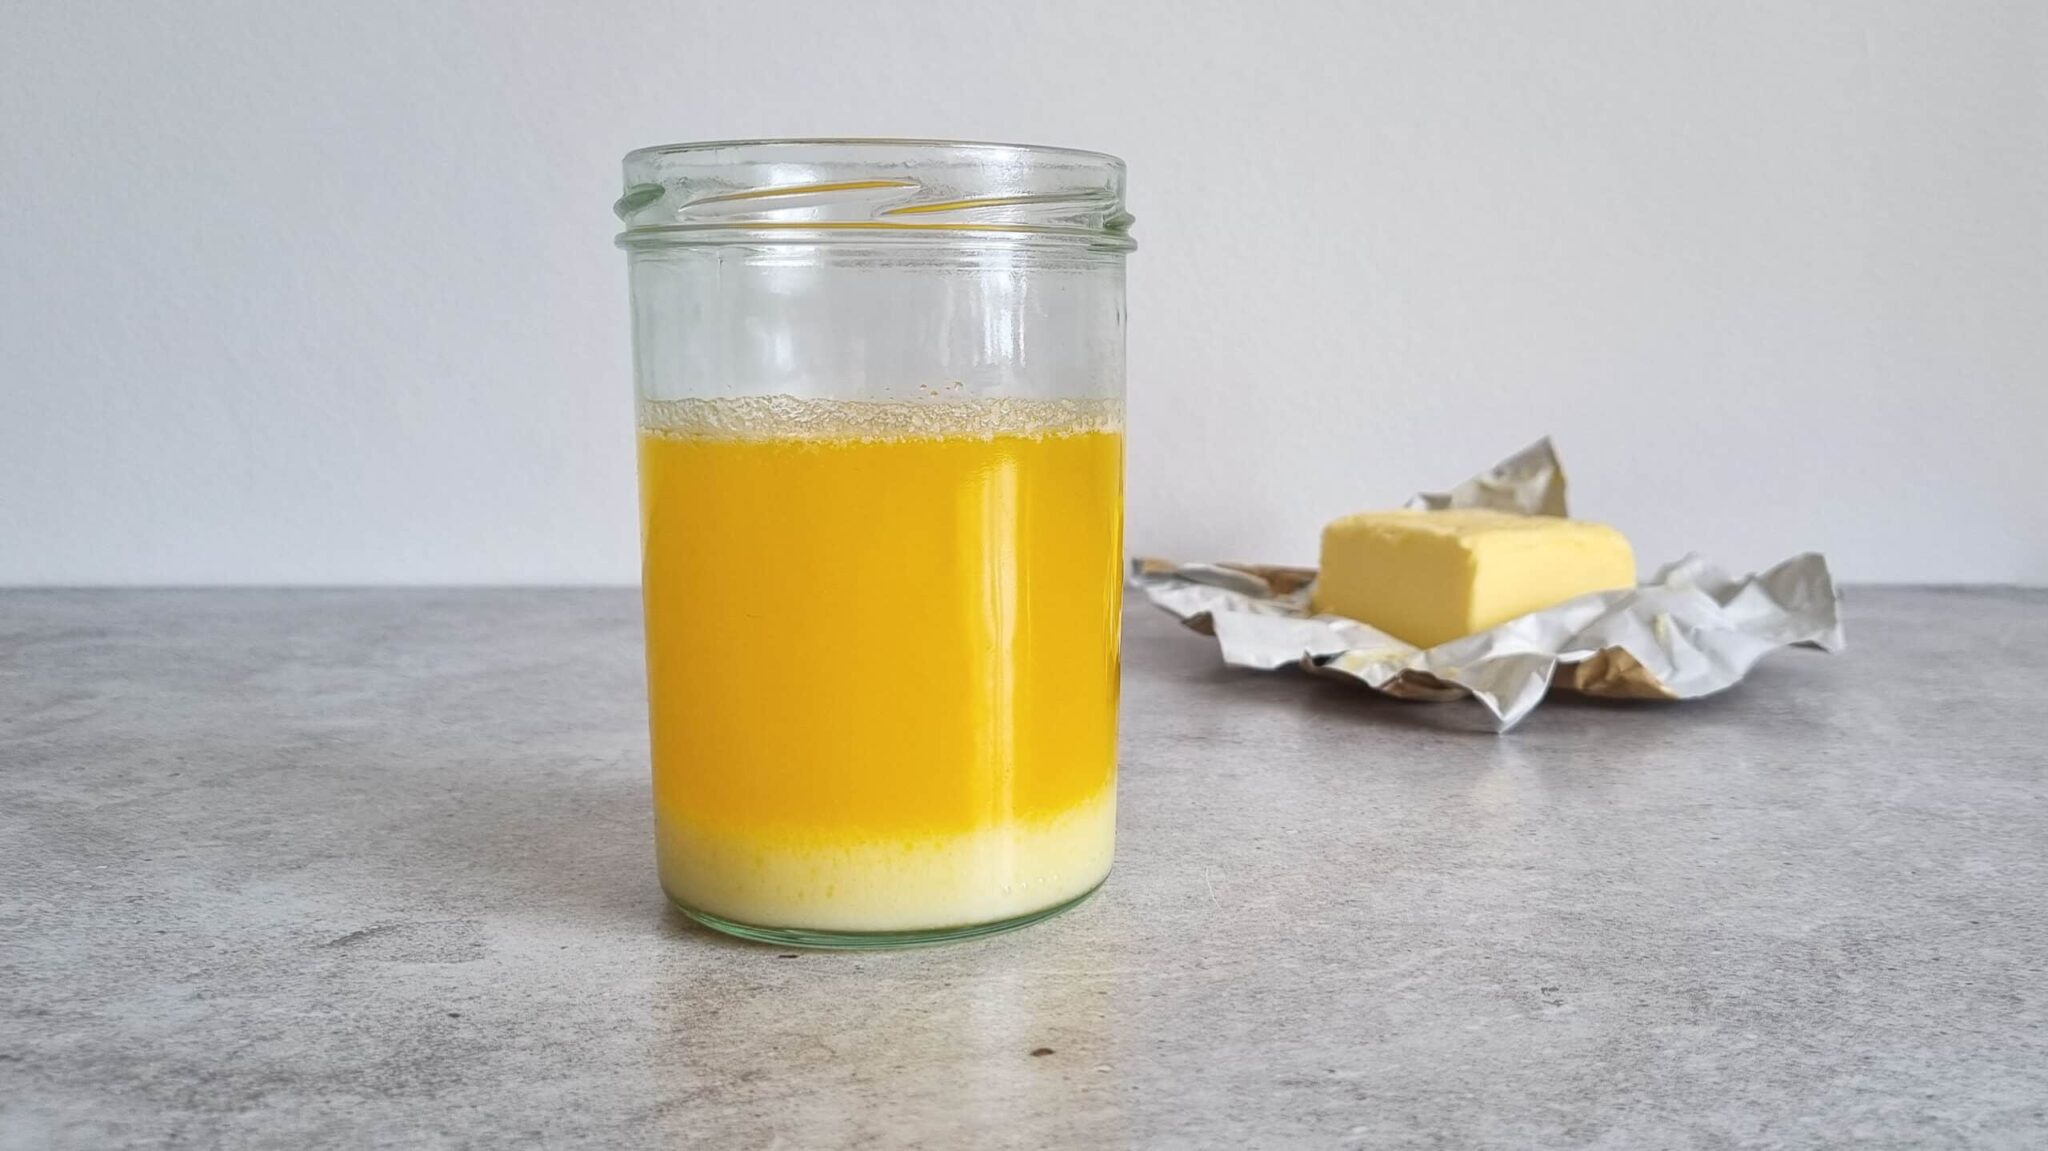 Melted butter in a glass. The butter has separated into three layers, a very light yellow layer at the bottom, a thicker layer of deep yellow and a thin white layer on top.